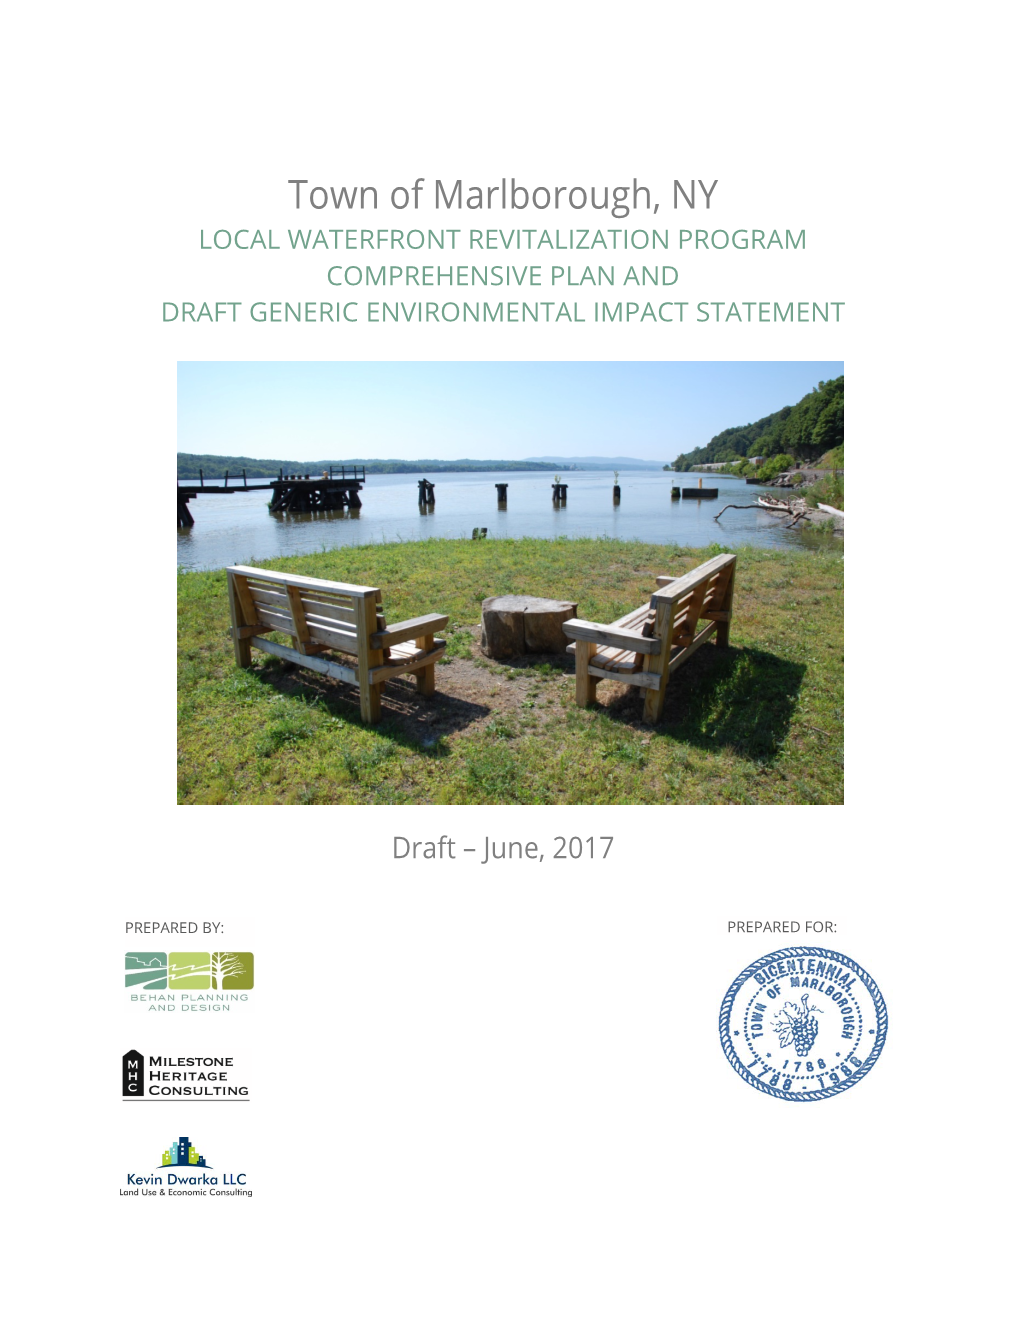 Town of Marlborough, NY LOCAL WATERFRONT REVITALIZATION PROGRAM COMPREHENSIVE PLAN and DRAFT GENERIC ENVIRONMENTAL IMPACT STATEMENT